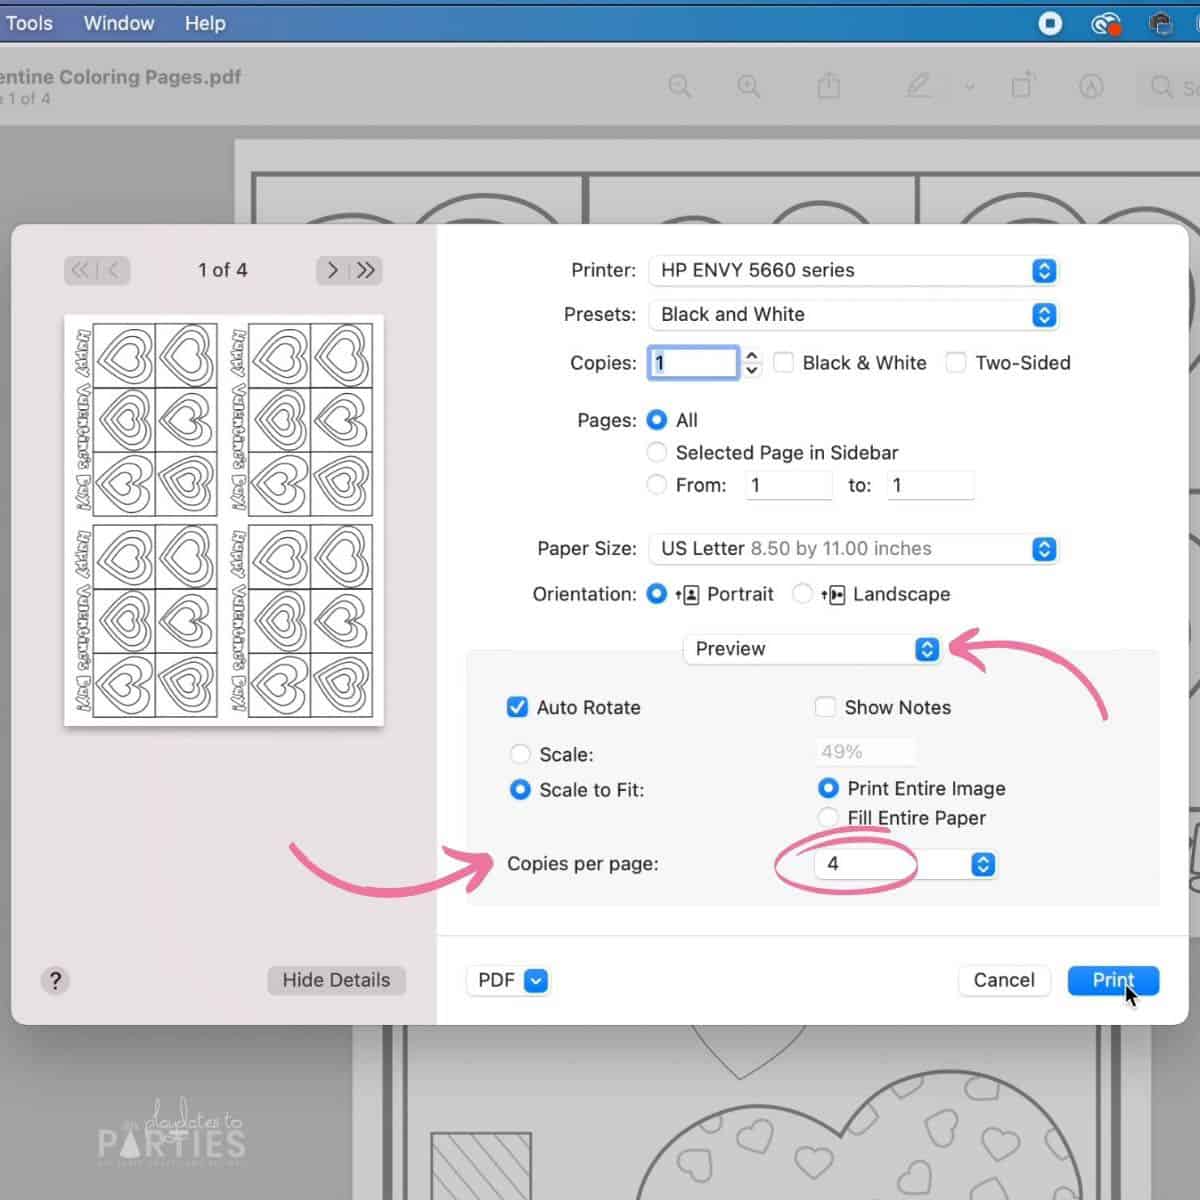 Screenshot showing how to print multiple copies of one page per sheet.